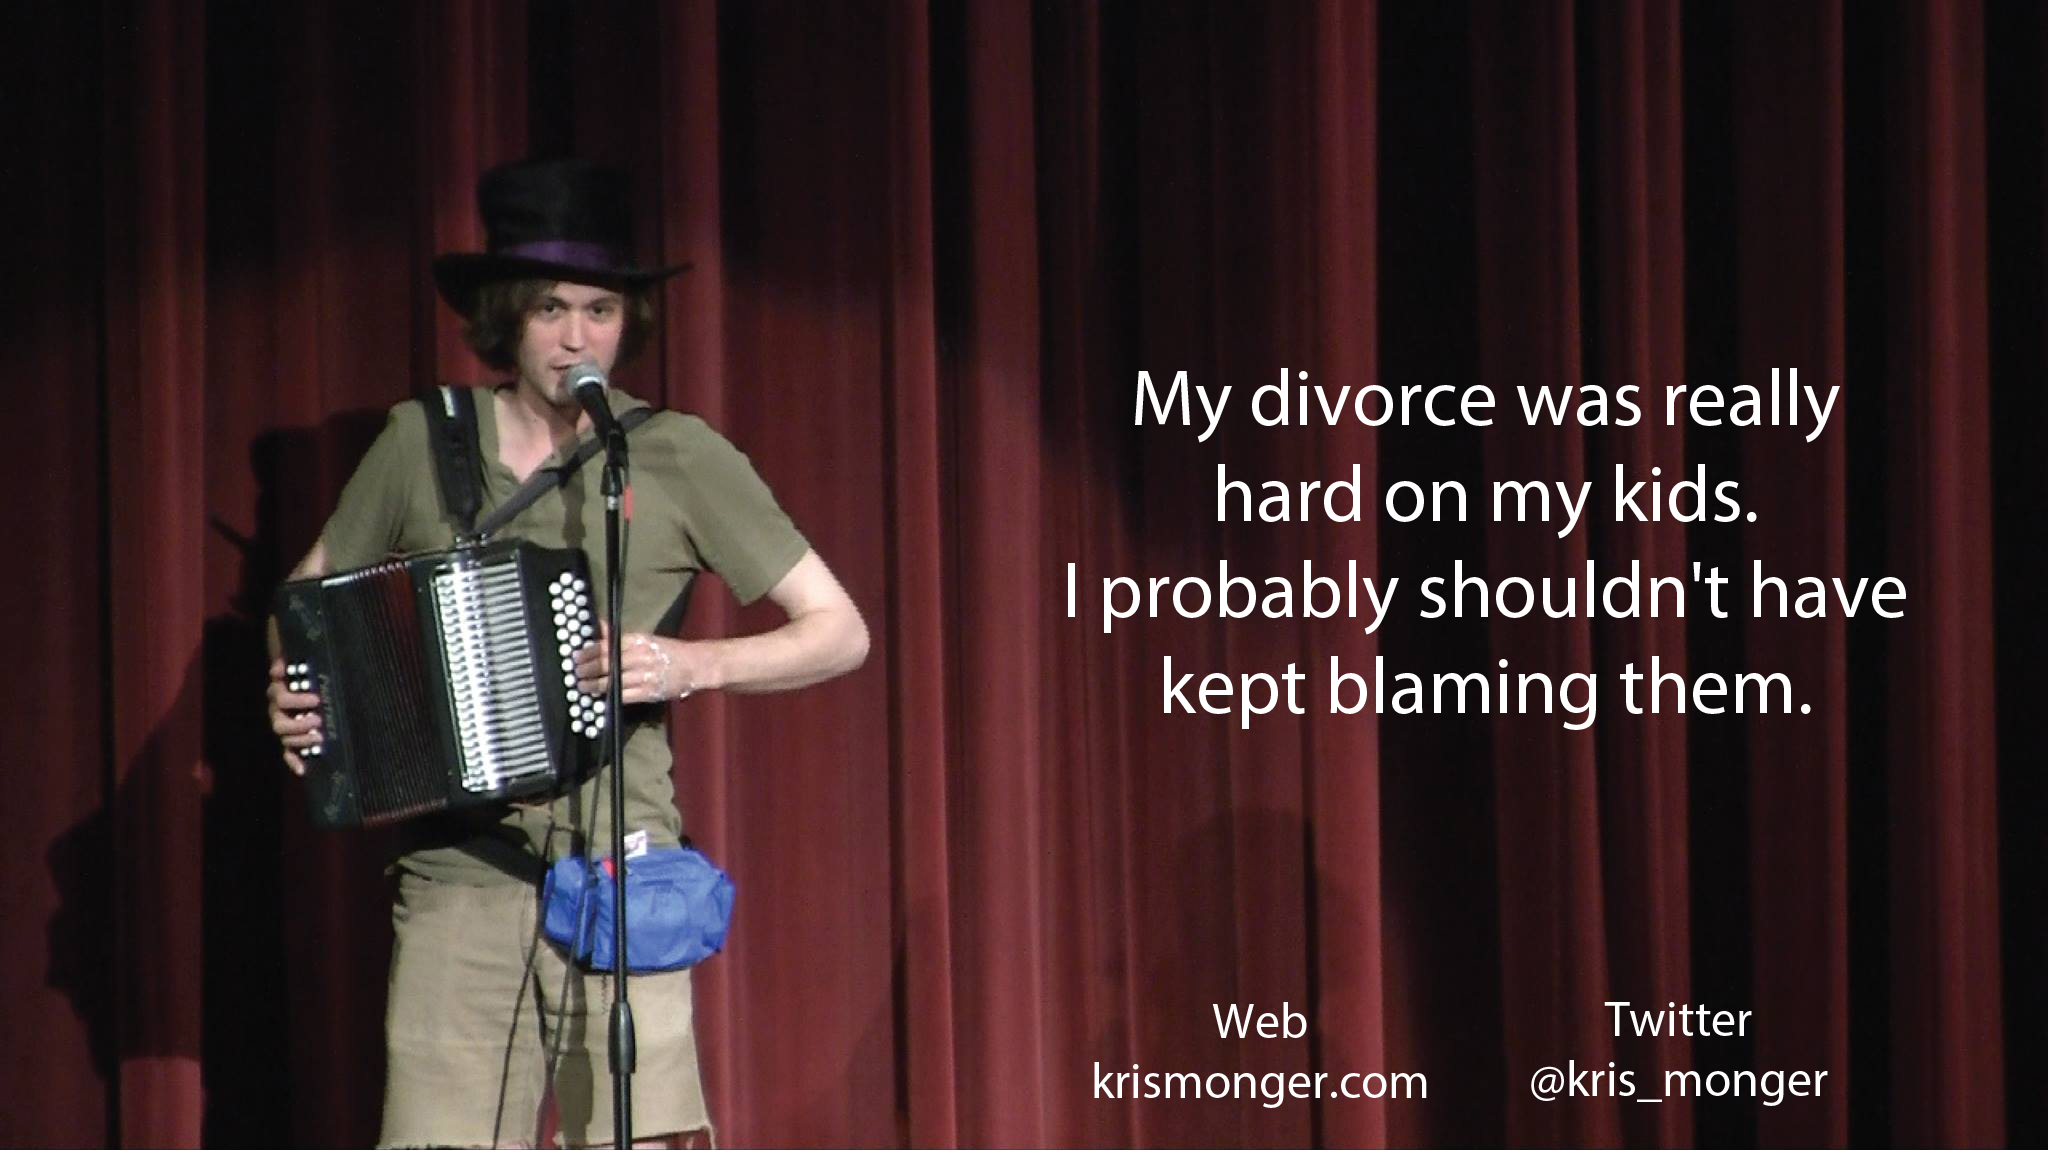 stand up comedy jokes for kids - My divorce was really hard on my kids. I probably shouldn't have kept blaming them. Web krismonger.com Twitter